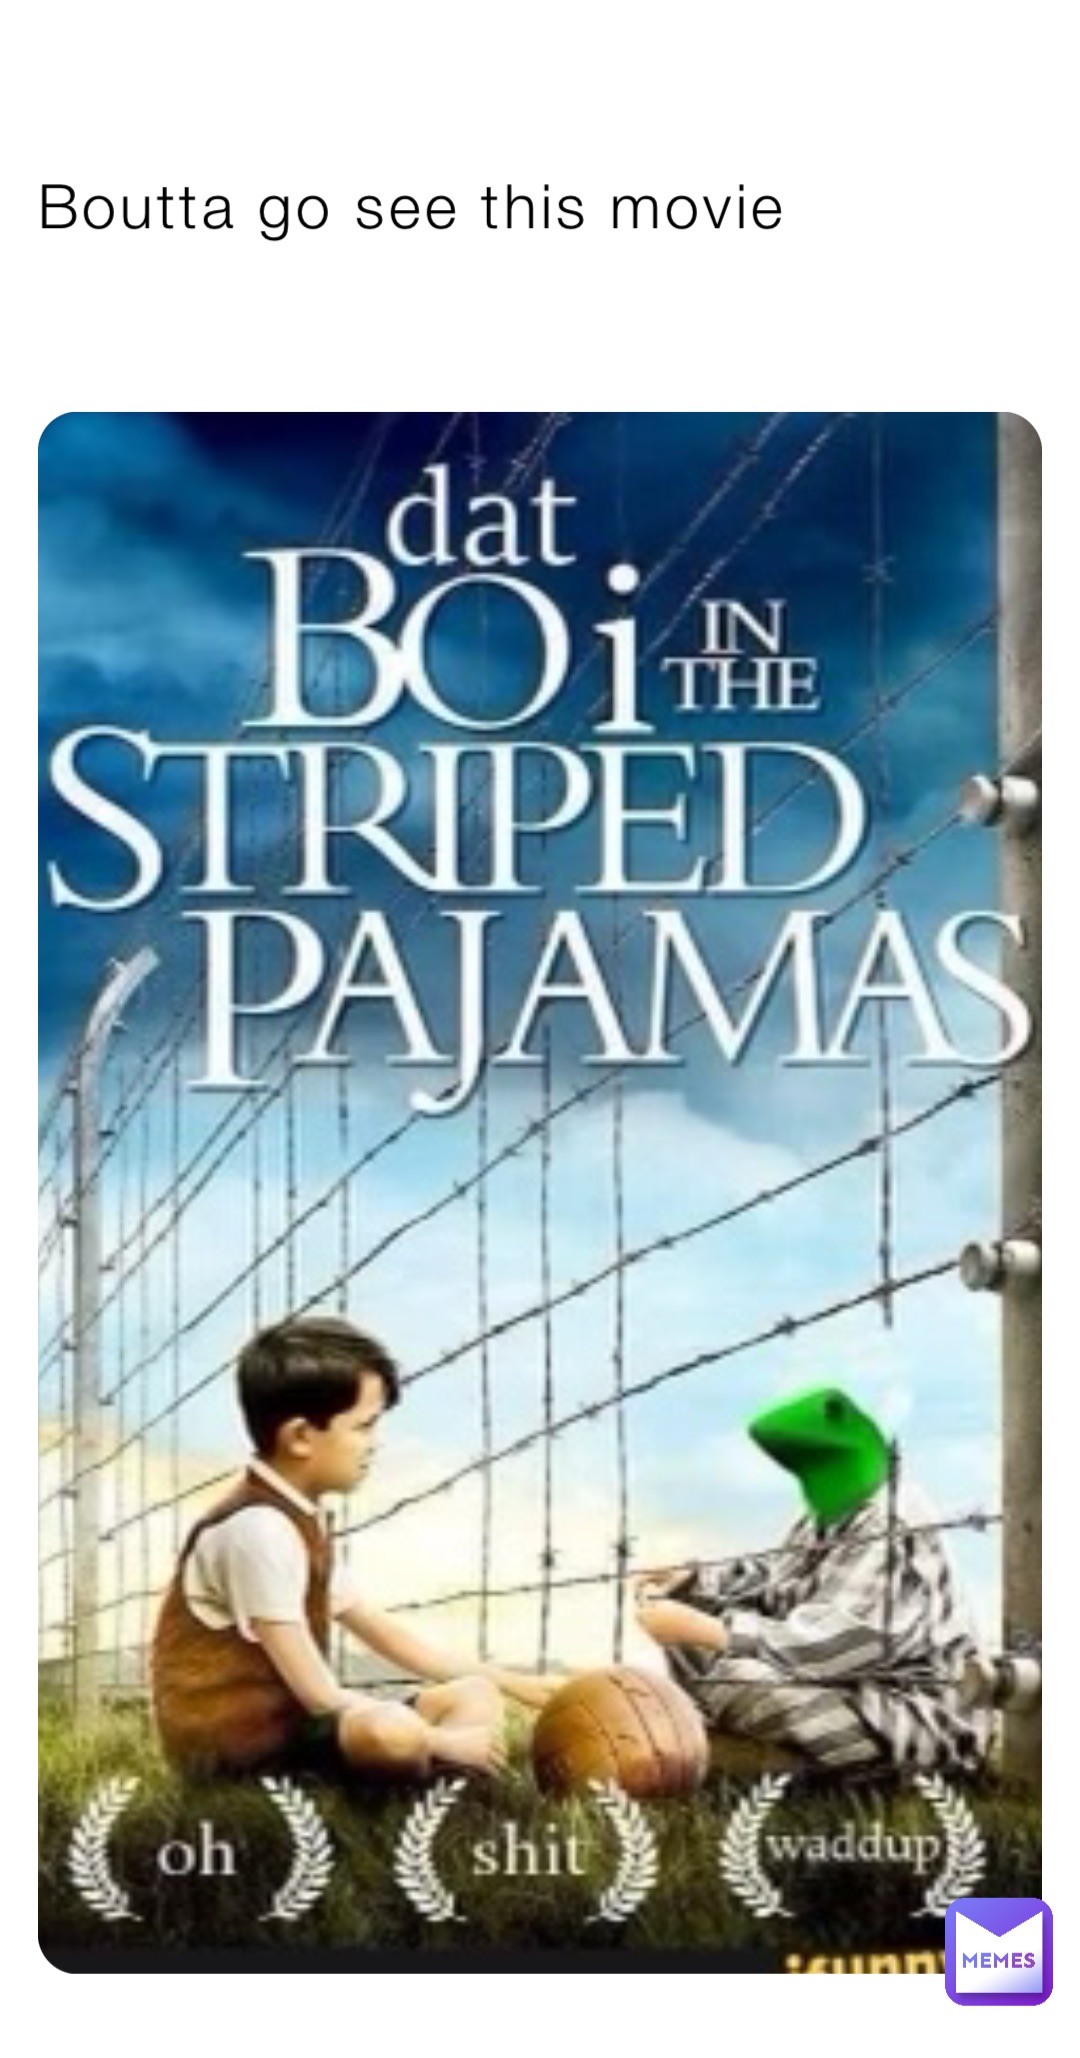 Boutta go see this movie